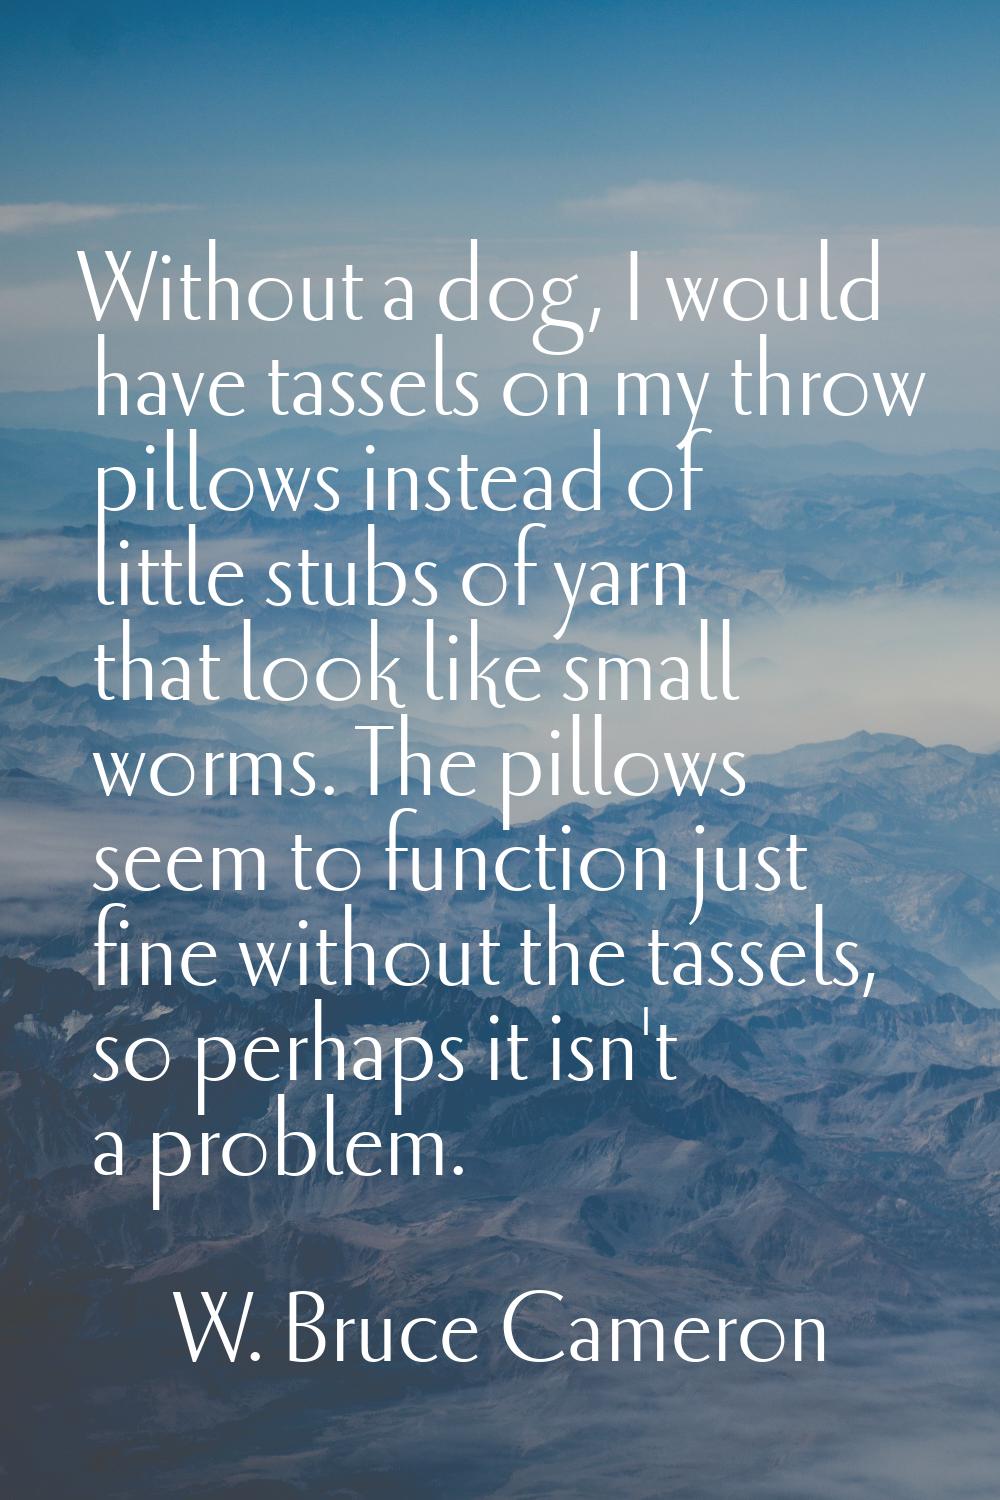 Without a dog, I would have tassels on my throw pillows instead of little stubs of yarn that look l